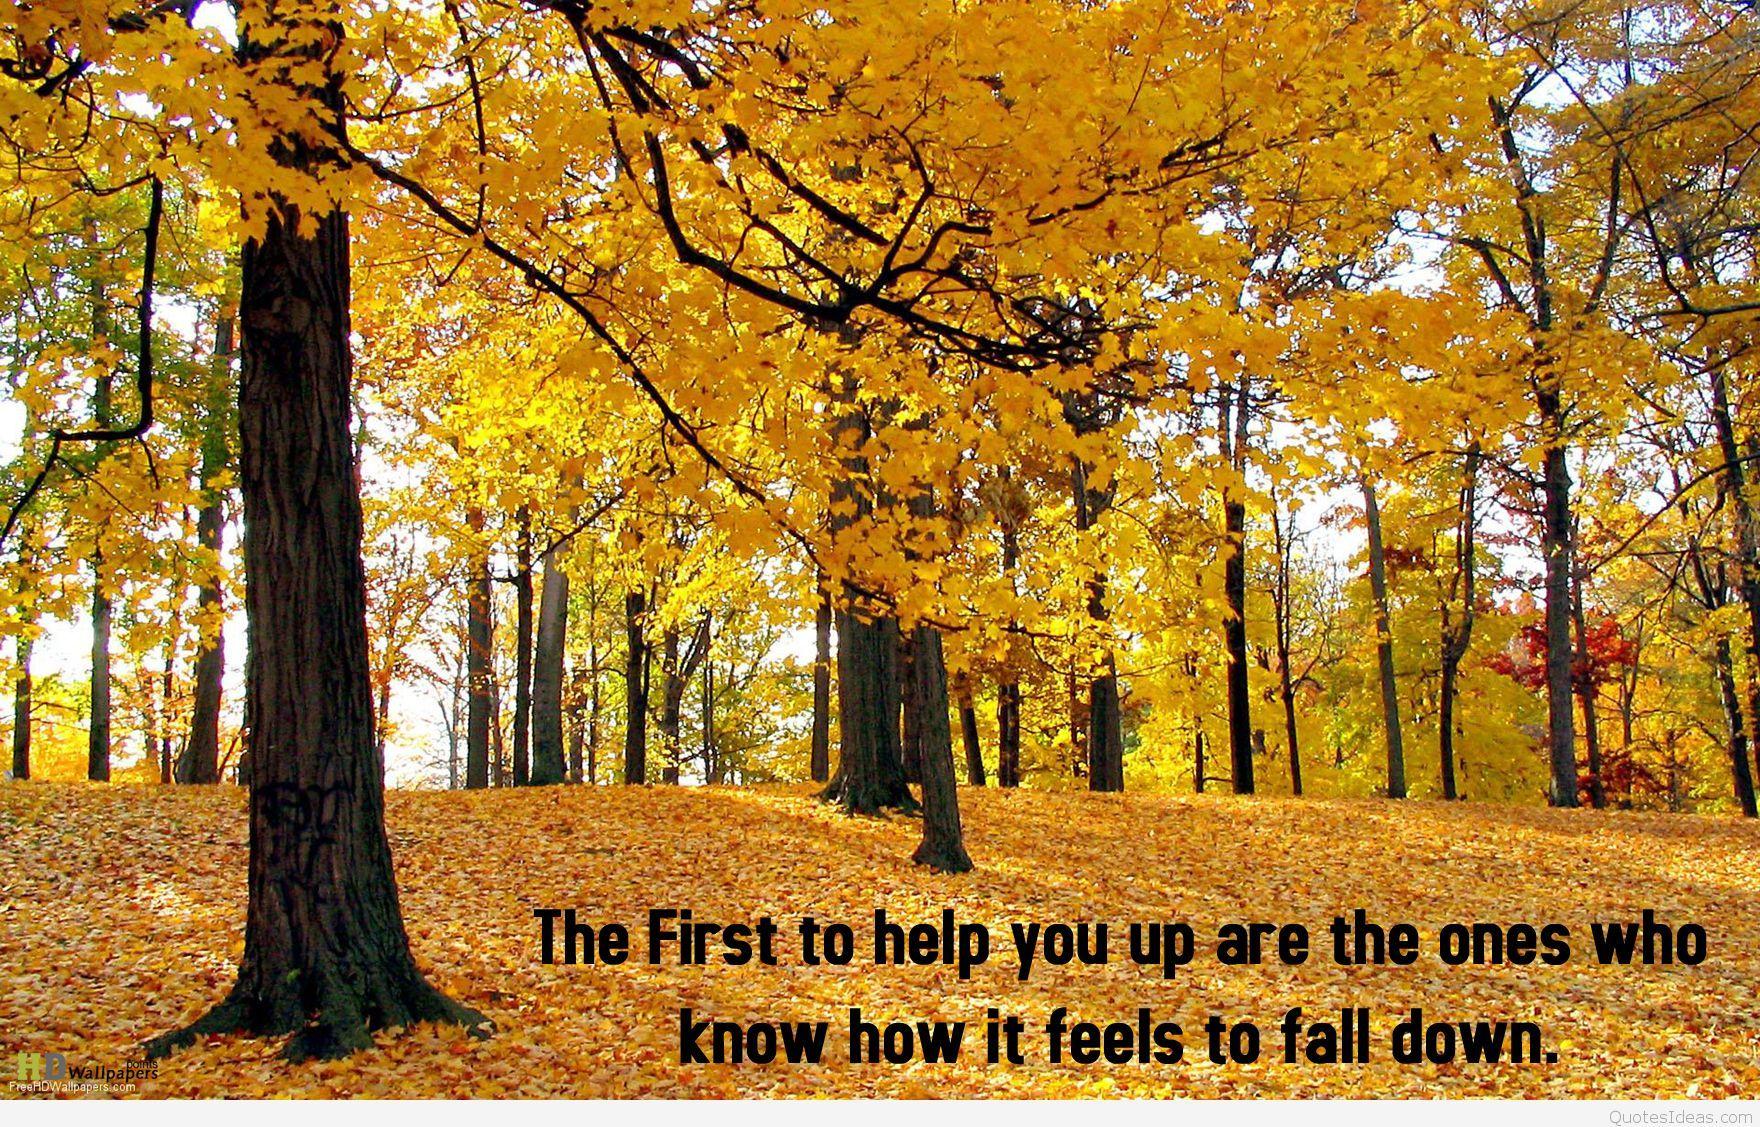 Best Autumn wallpaper quotes, sayings, image hd